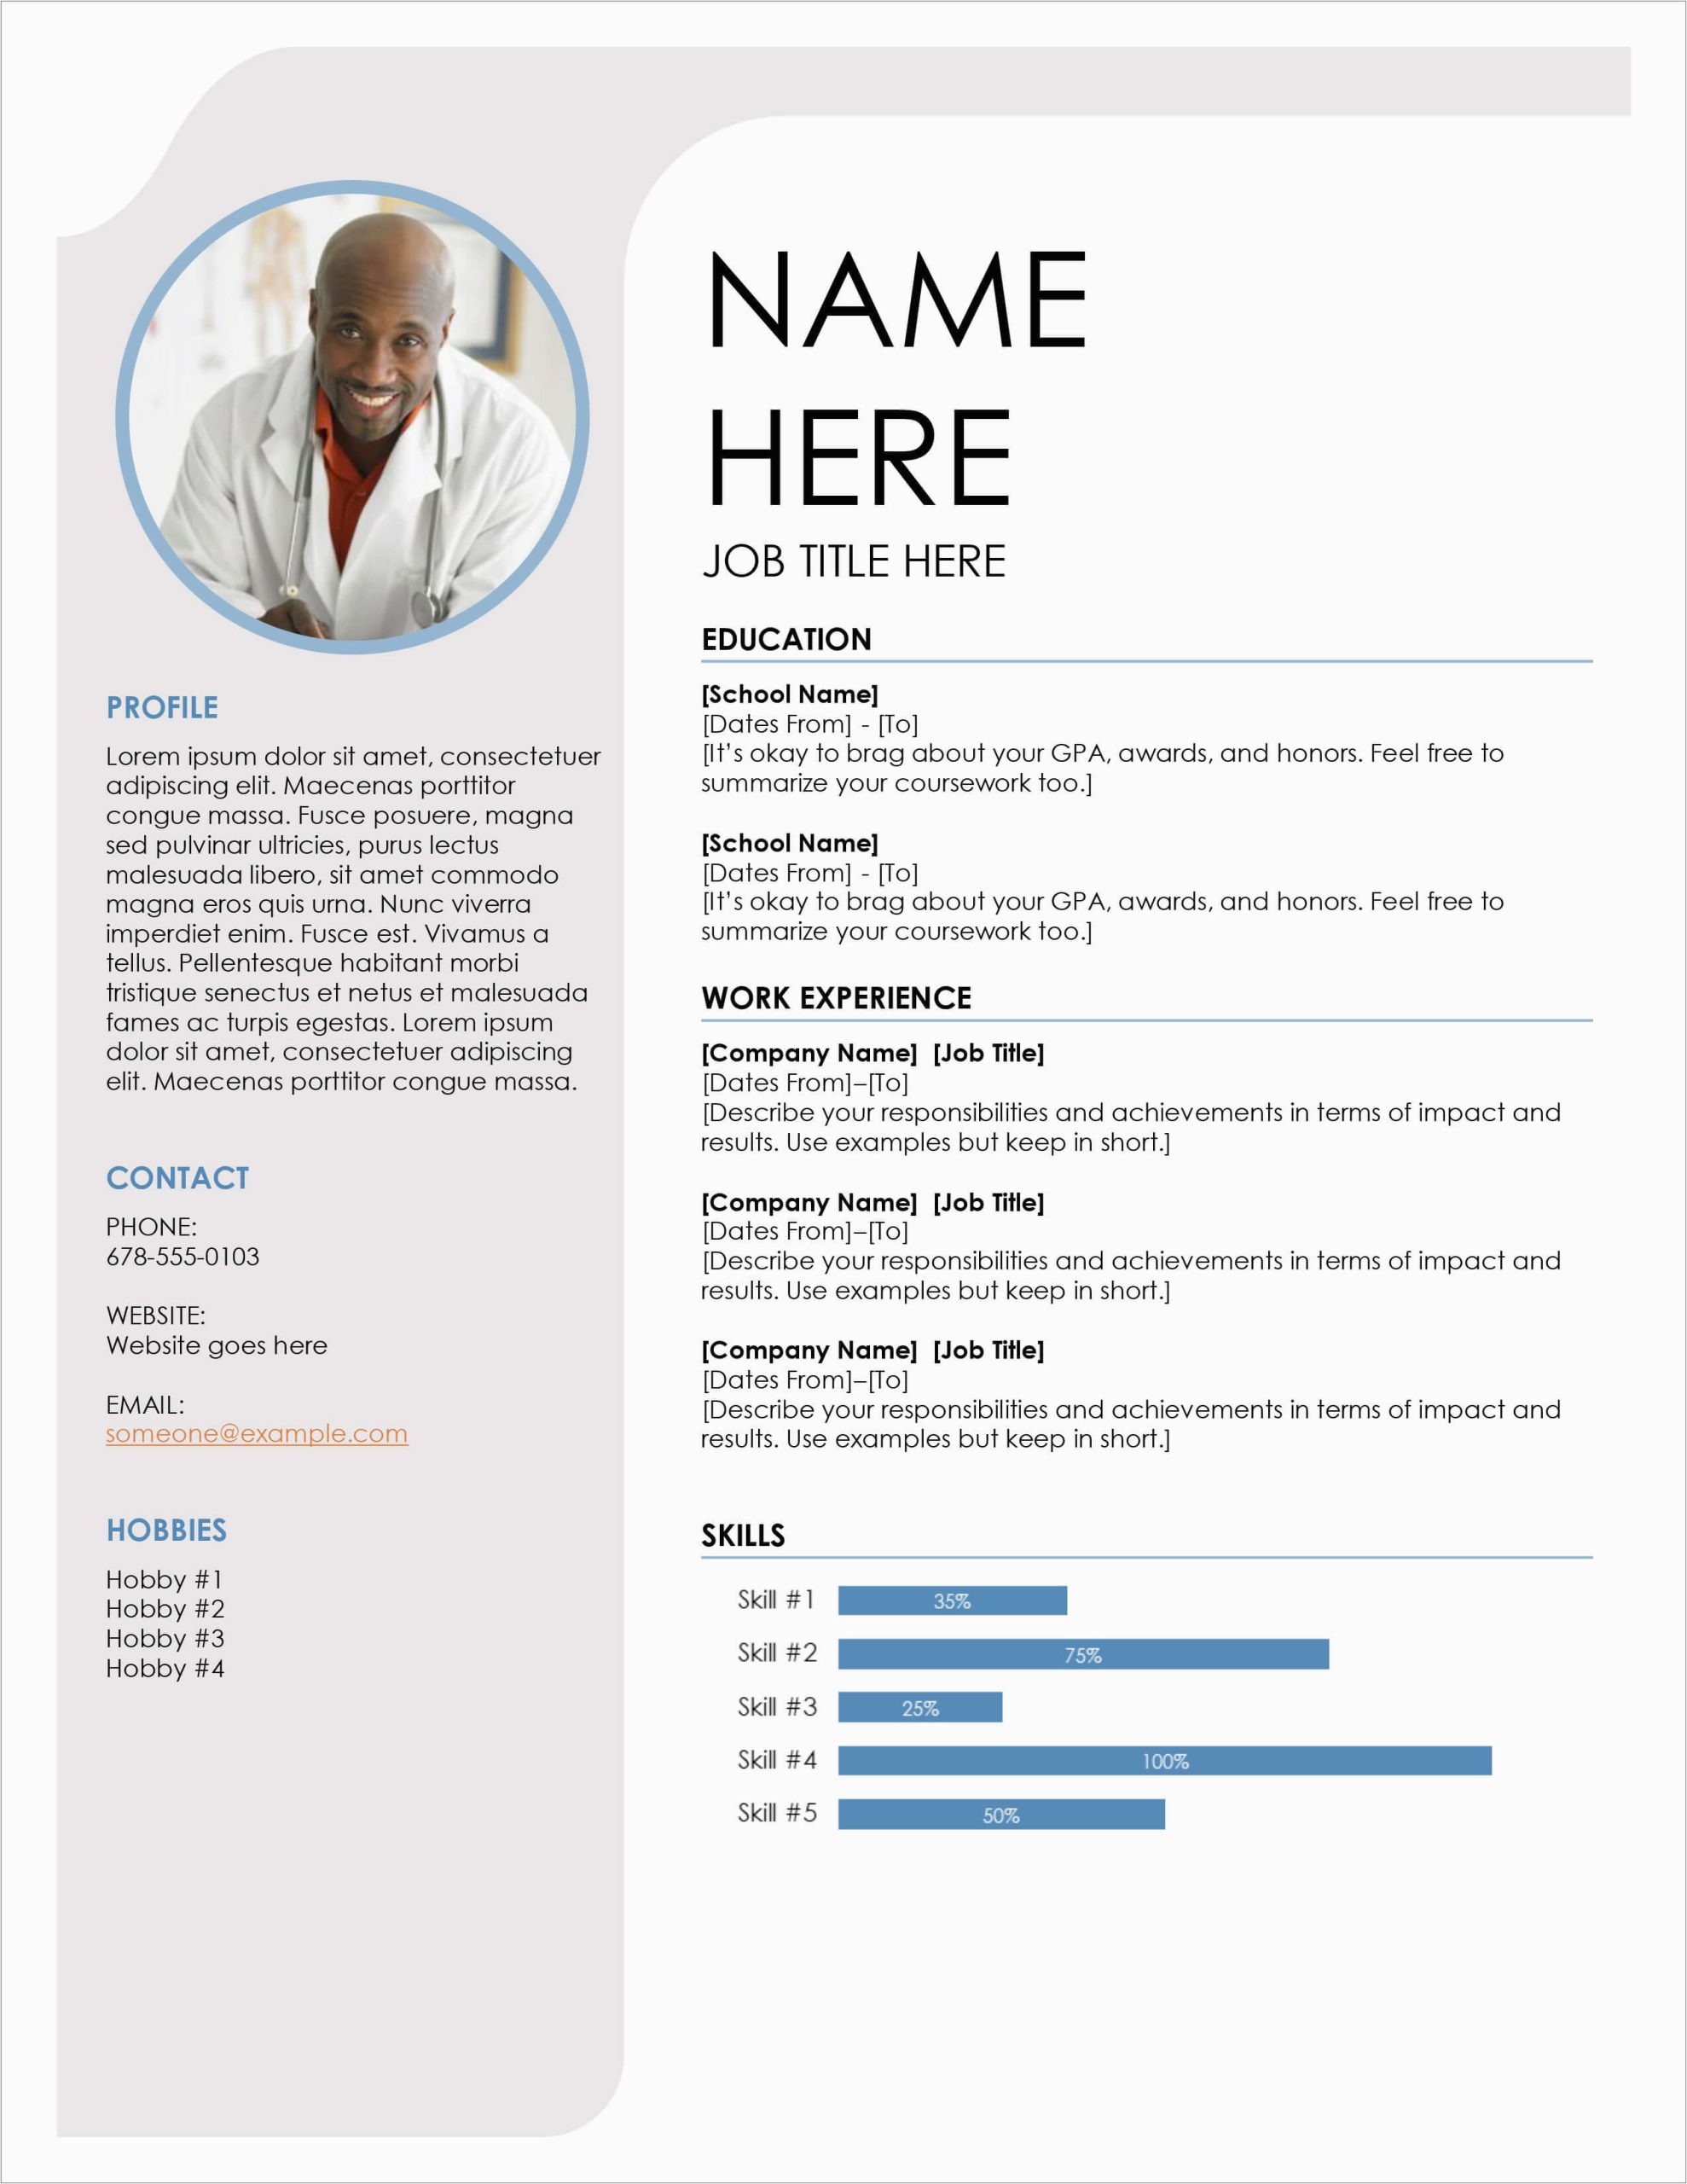 Sample Resume format that Can Be Edited 45 Free Modern Resume Cv Templates – Minimalist Simple for Microsoft